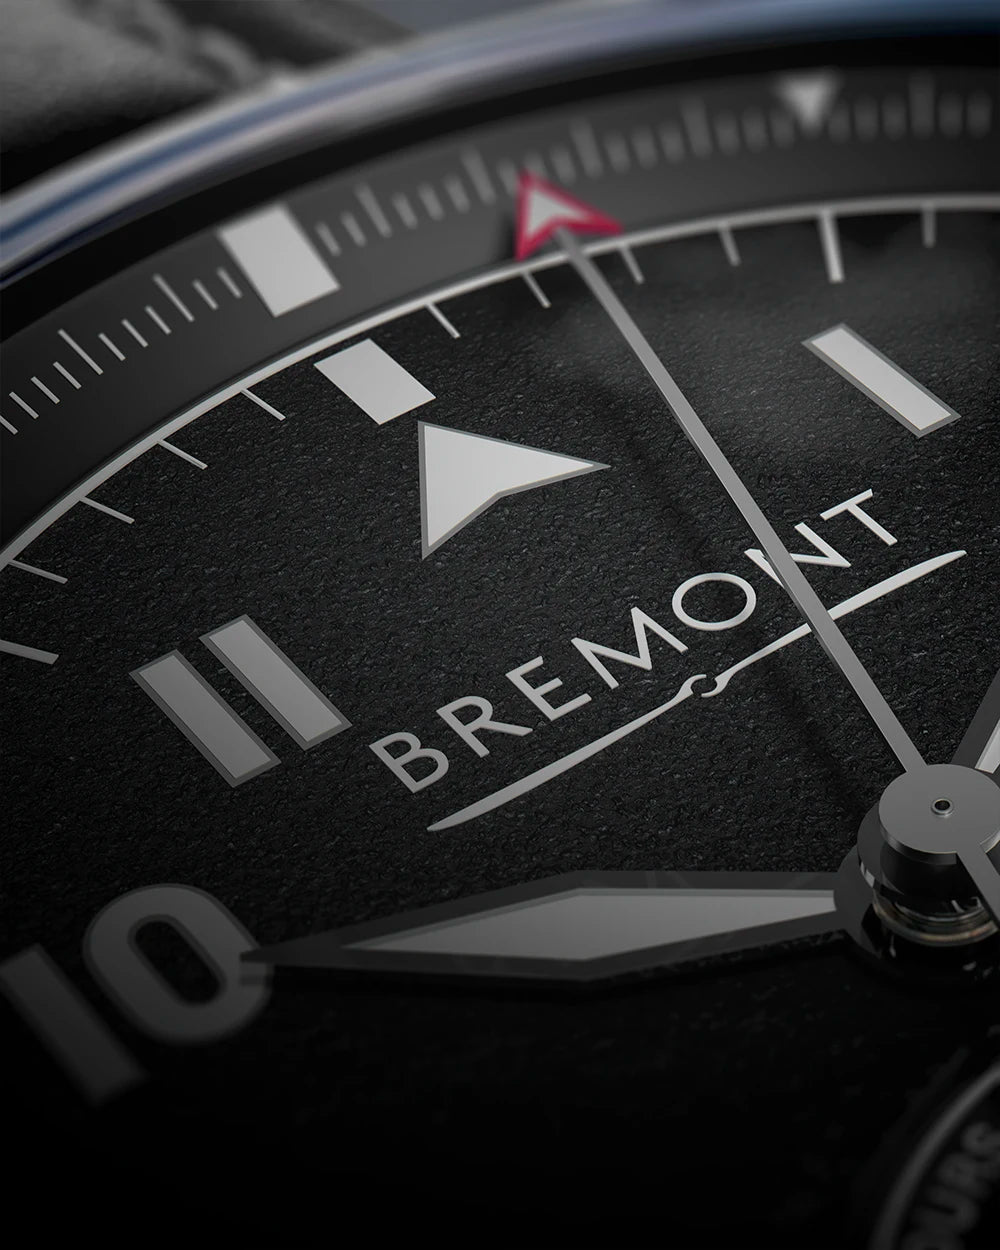 Every Bremont pilot watch is powered by a steadfast chronometer-rated mechanical movement..